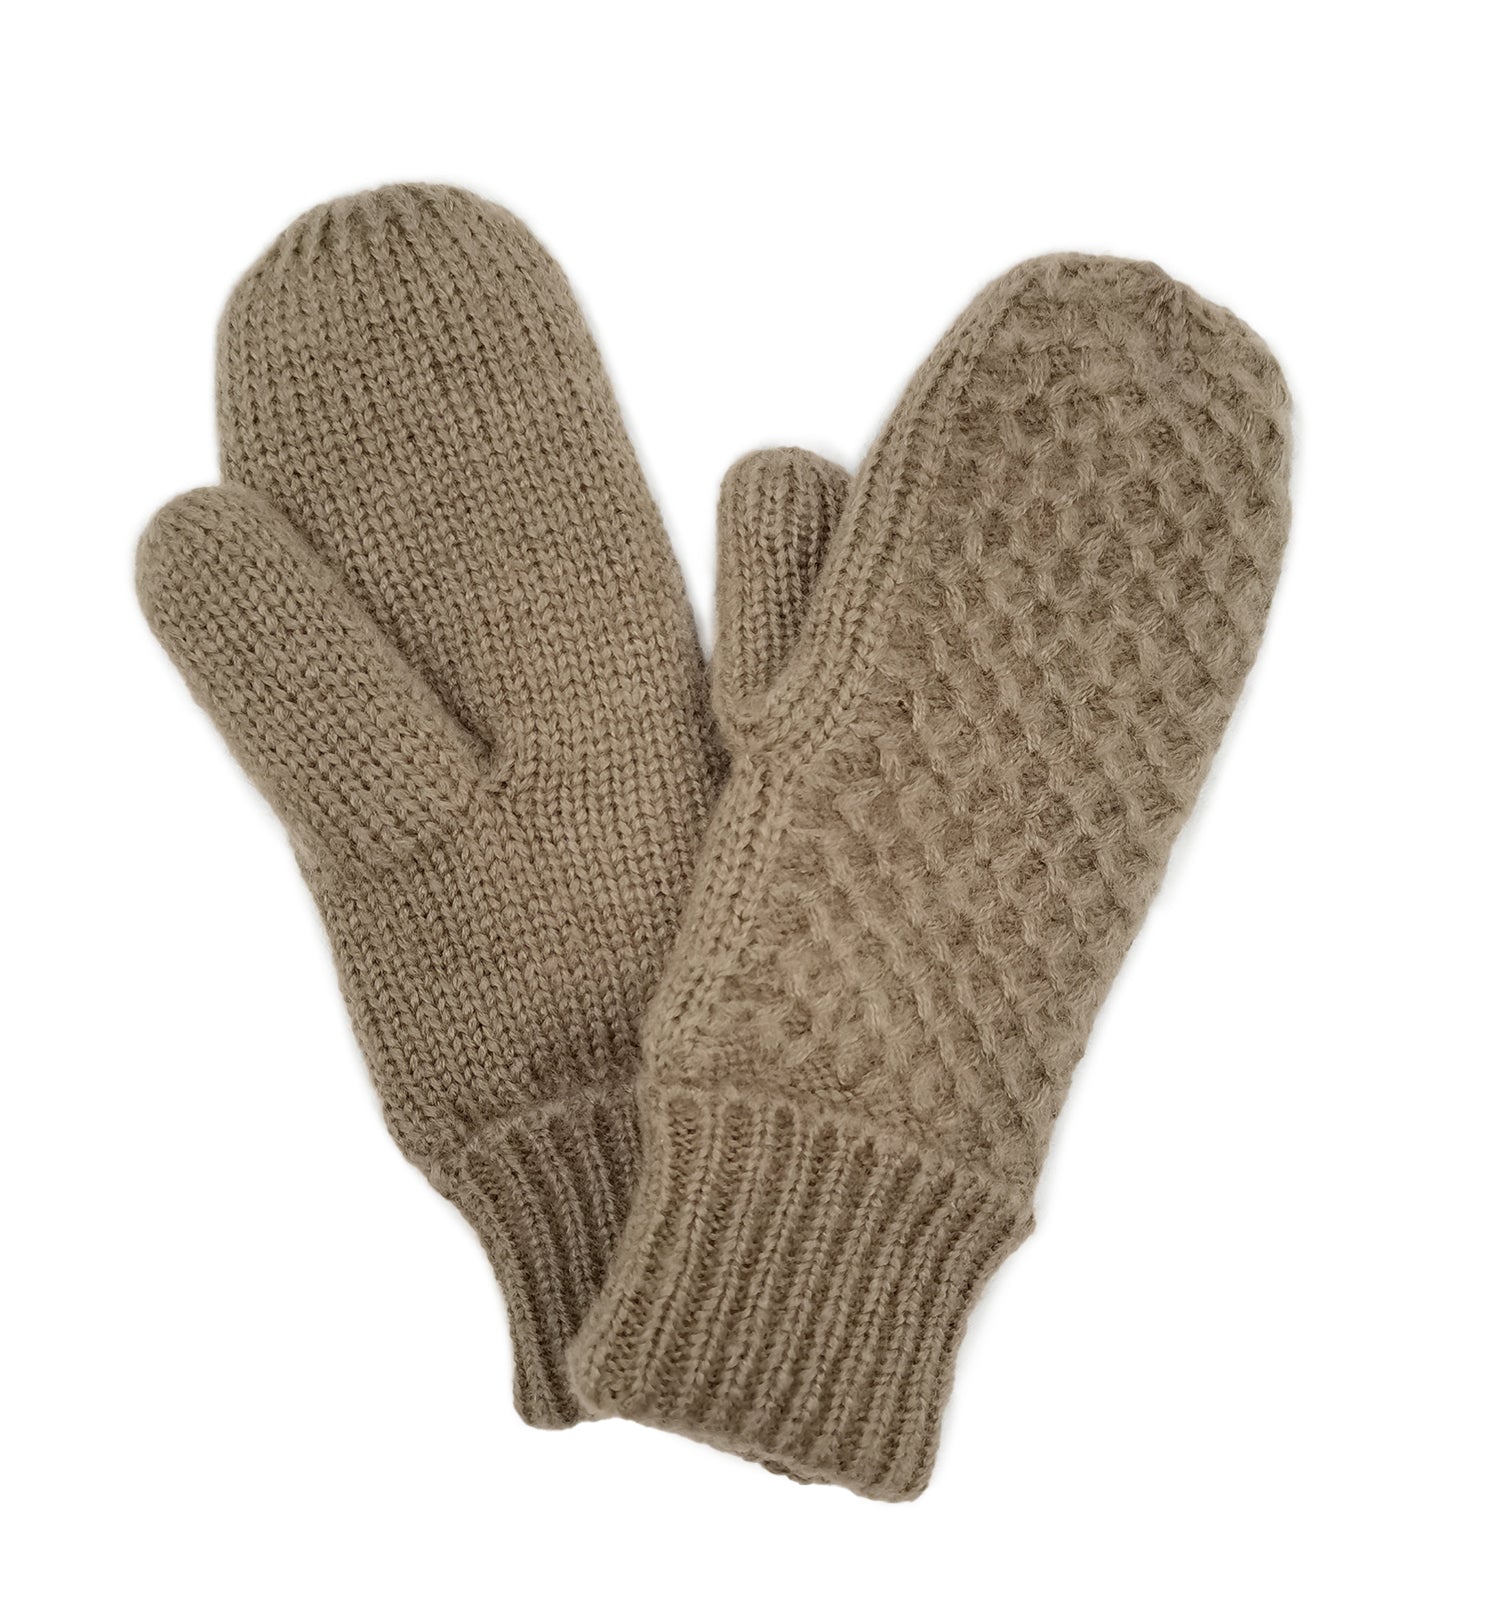 Shop for KW Fashion Cable Knit Mittens With Sherpa Lining at doeverythinginloveny.com wholesale fashion accessories